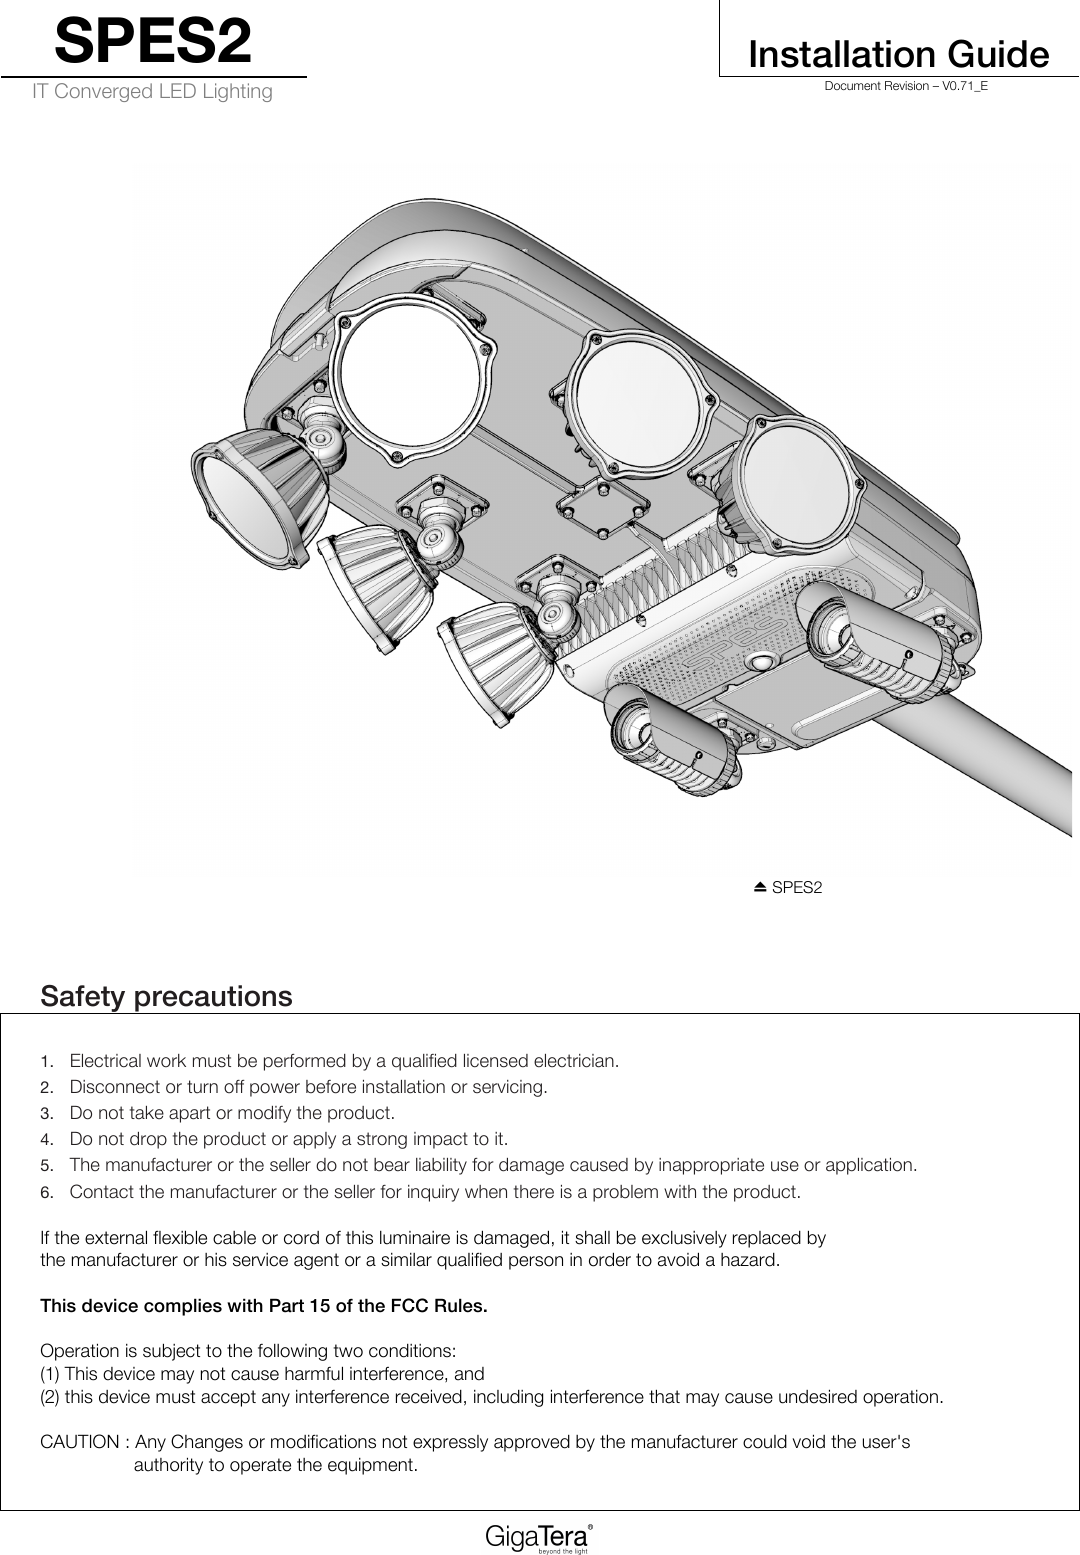 SPES2   Installation Guide IT Converged LED Lighting   Document Revision – V0.71_E   ⏏ SPES2  !Safety precautions 1. Electrical work must be performed by a qualified licensed electrician. 2. Disconnect or turn off power before installation or servicing. 3. Do not take apart or modify the product. 4. Do not drop the product or apply a strong impact to it. 5. The manufacturer or the seller do not bear liability for damage caused by inappropriate use or application. 6. Contact the manufacturer or the seller for inquiry when there is a problem with the product.   If the external flexible cable or cord of this luminaire is damaged, it shall be exclusively replaced by  the manufacturer or his service agent or a similar qualified person in order to avoid a hazard.  This device complies with Part 15 of the FCC Rules.  Operation is subject to the following two conditions: (1) This device may not cause harmful interference, and (2) this device must accept any interference received, including interference that may cause undesired operation. !   CAUTION : Any Changes or modifications not expressly approved by the manufacturer could void the user&apos;s  authority to operate the equipment. 